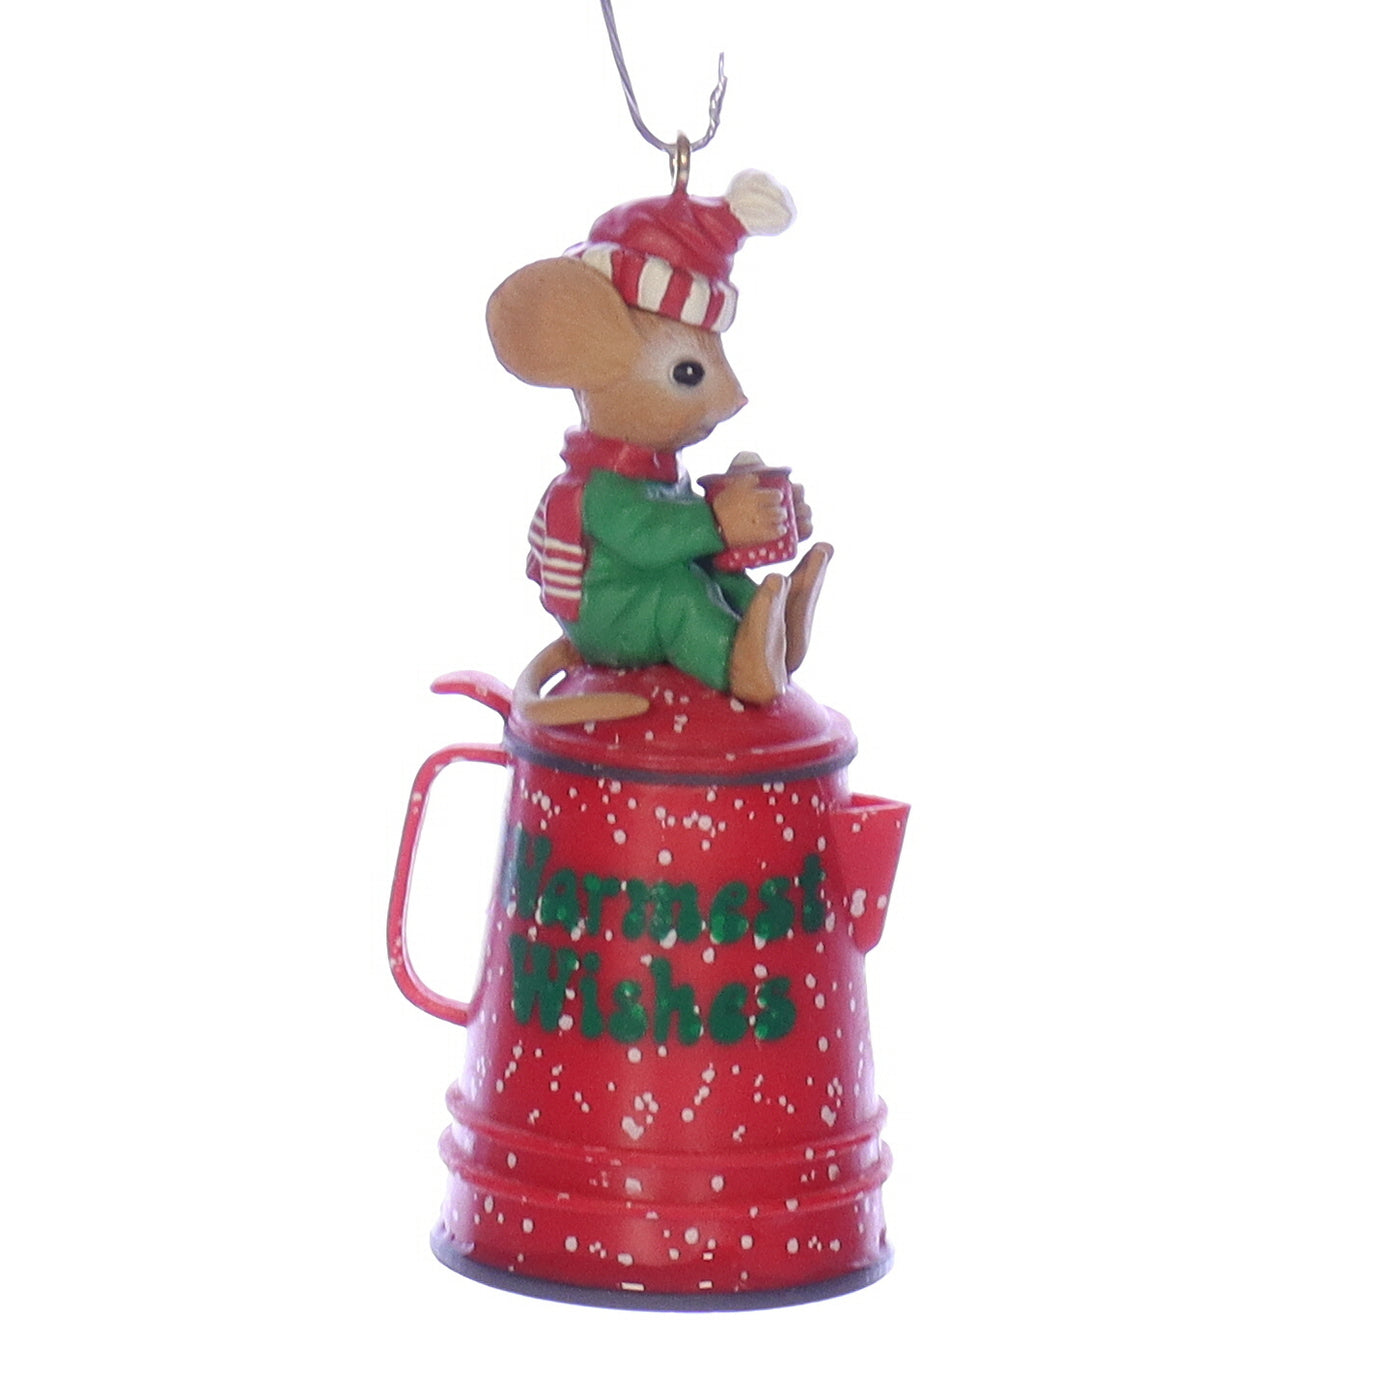 Enesco_Treasury_of_Christmas_Ornaments_564974_Brewing_Warm_Wishes_Mouse_Ornament_1991 Right View